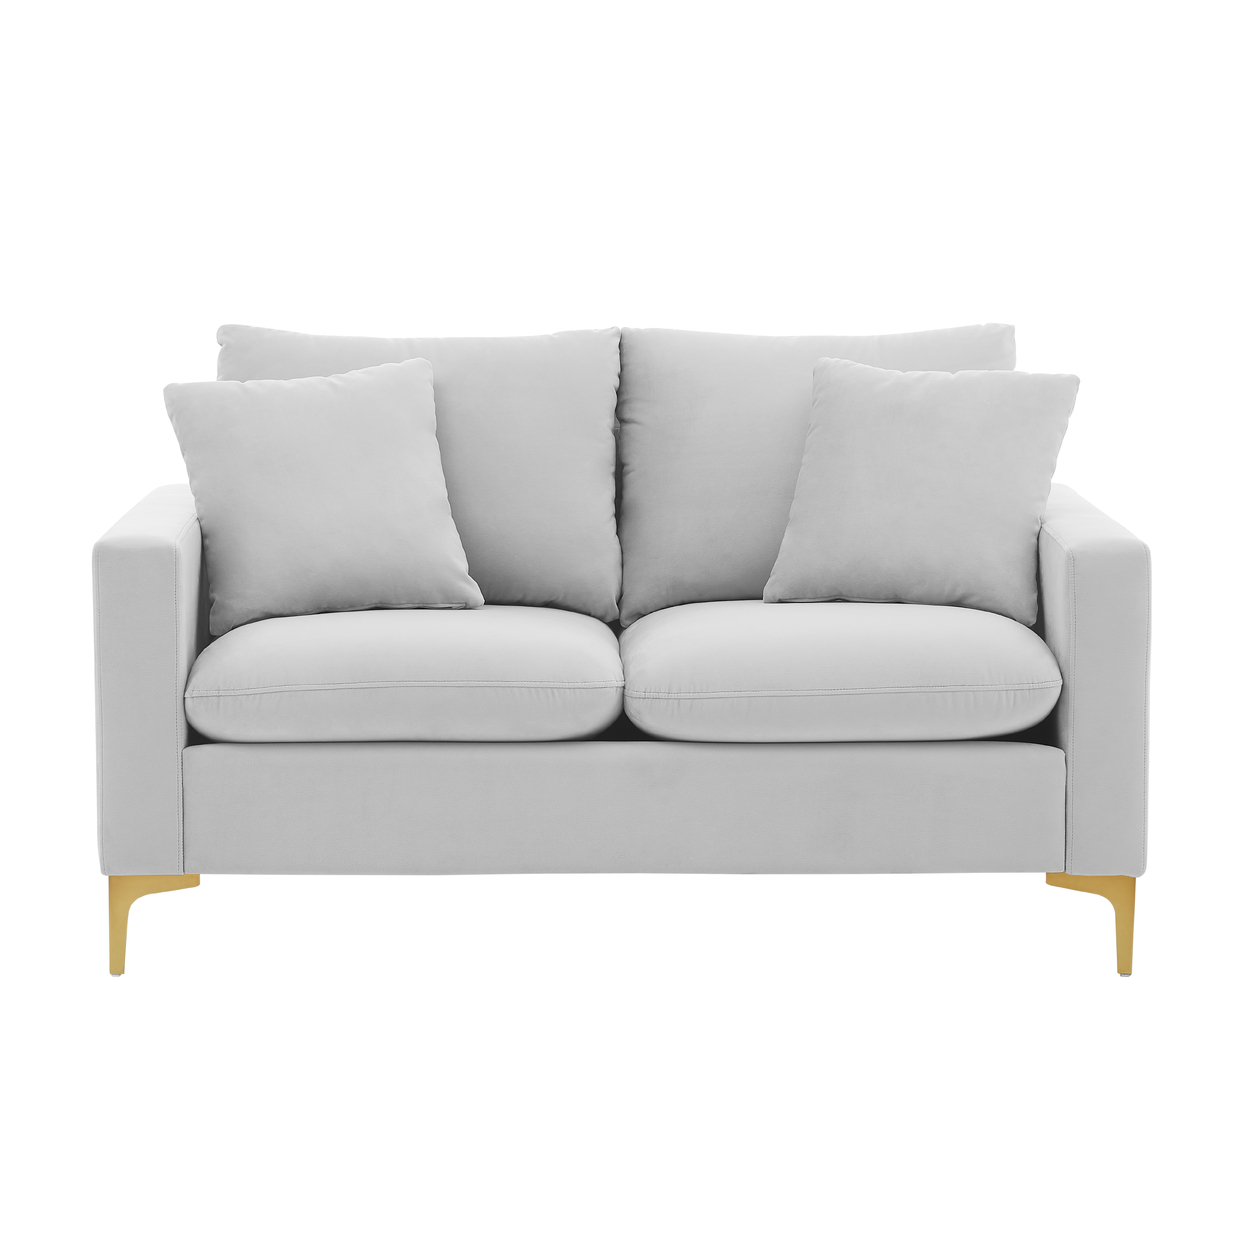 Iconic Home Roxi Loveseat Velvet Upholstered Multi-Cushion Seat Gold Tone Metal Y-Legs With 2 Decorative Pillows - Silver